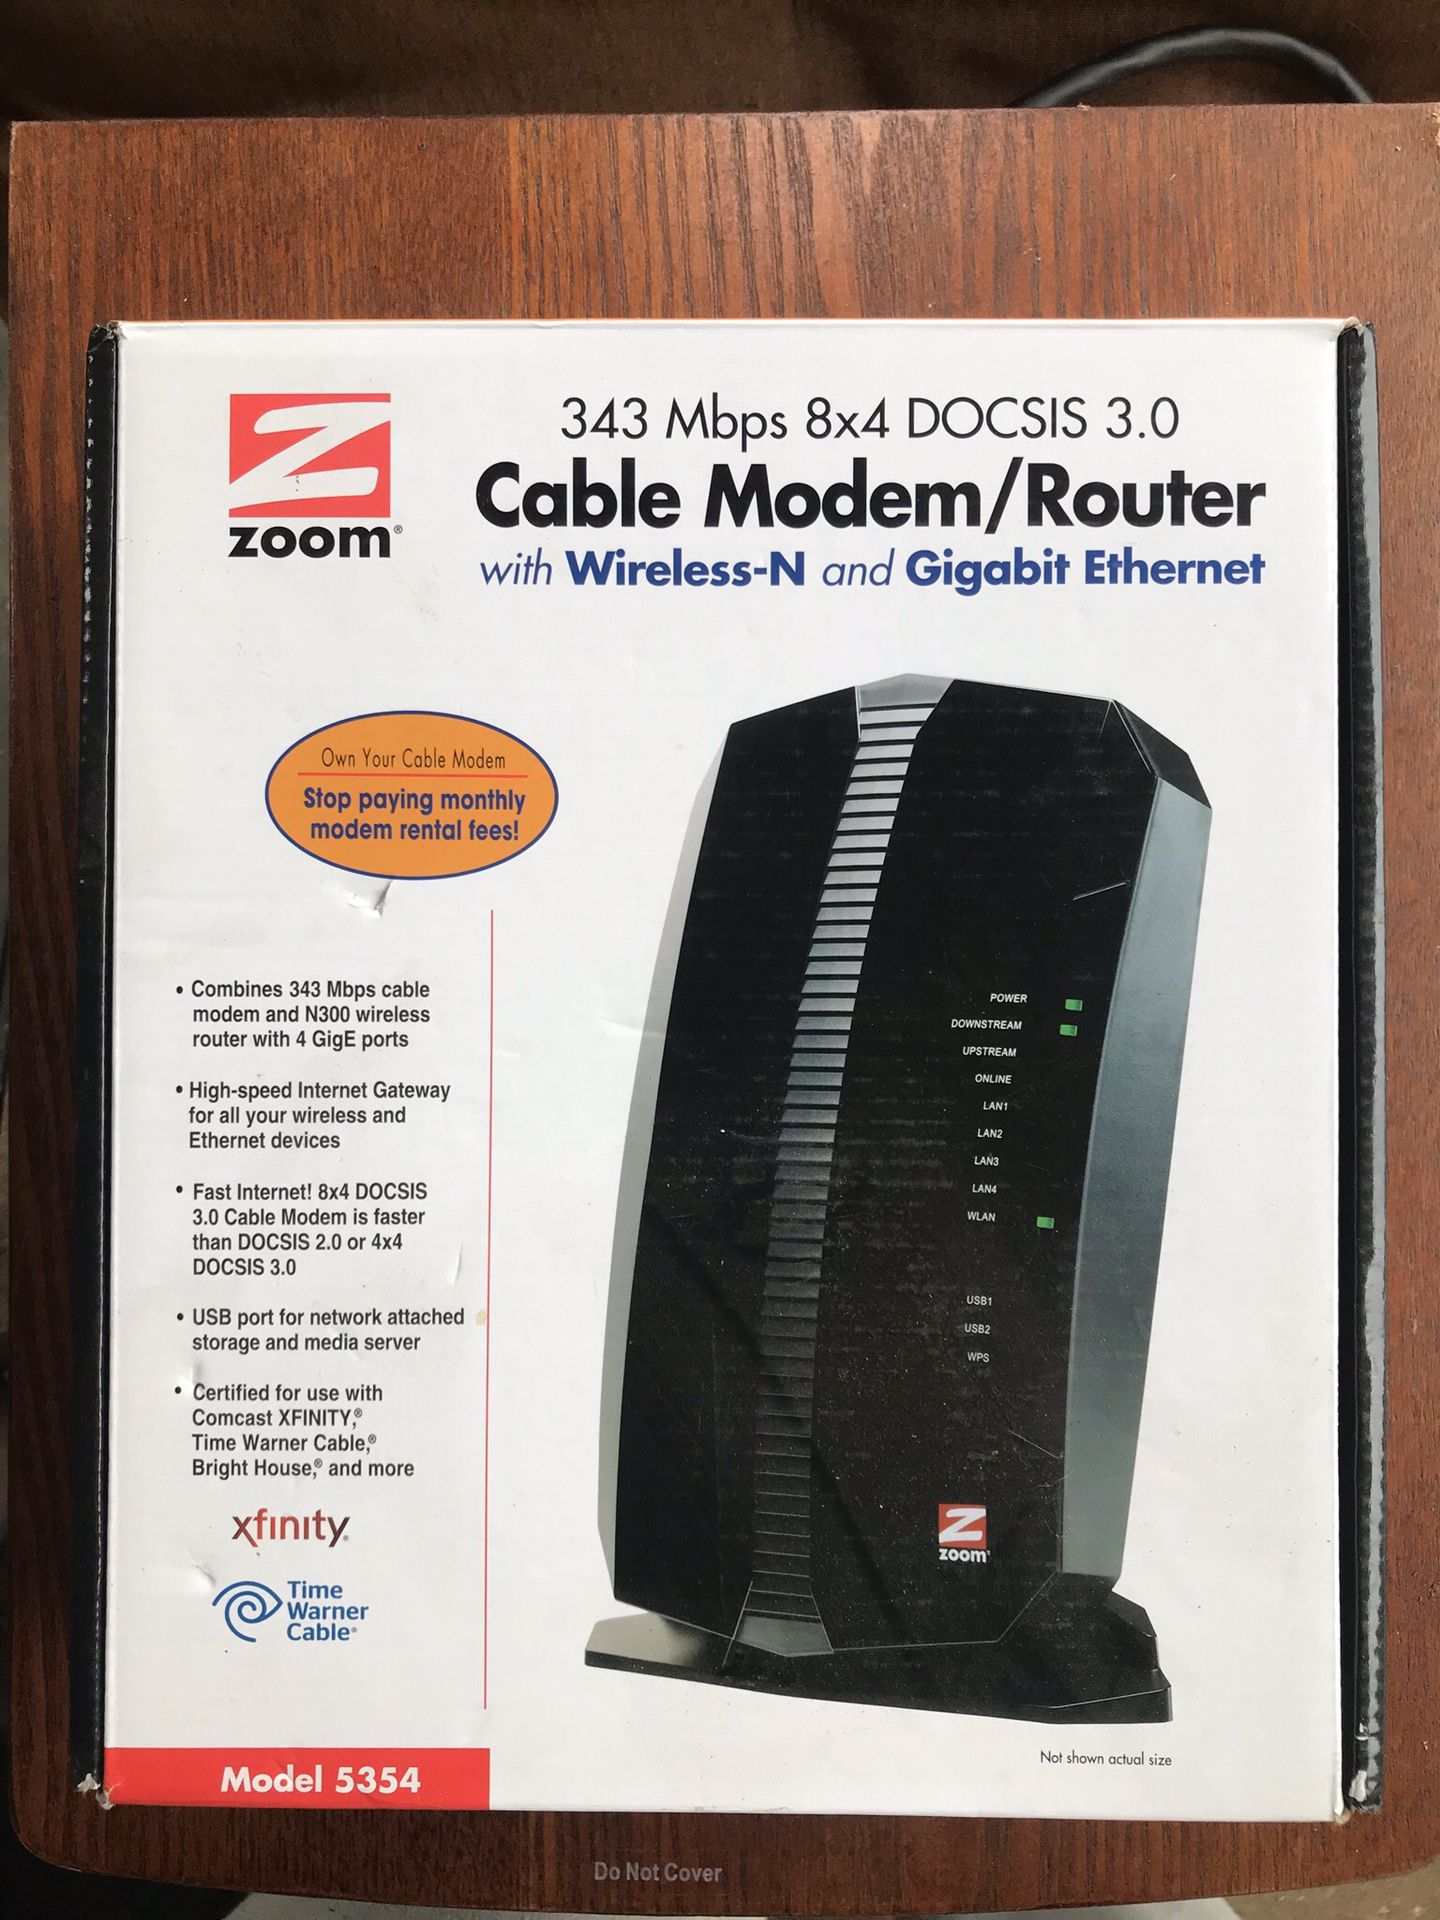 Cable Modem /Router with Wireless-N and Gigabit Ethernet